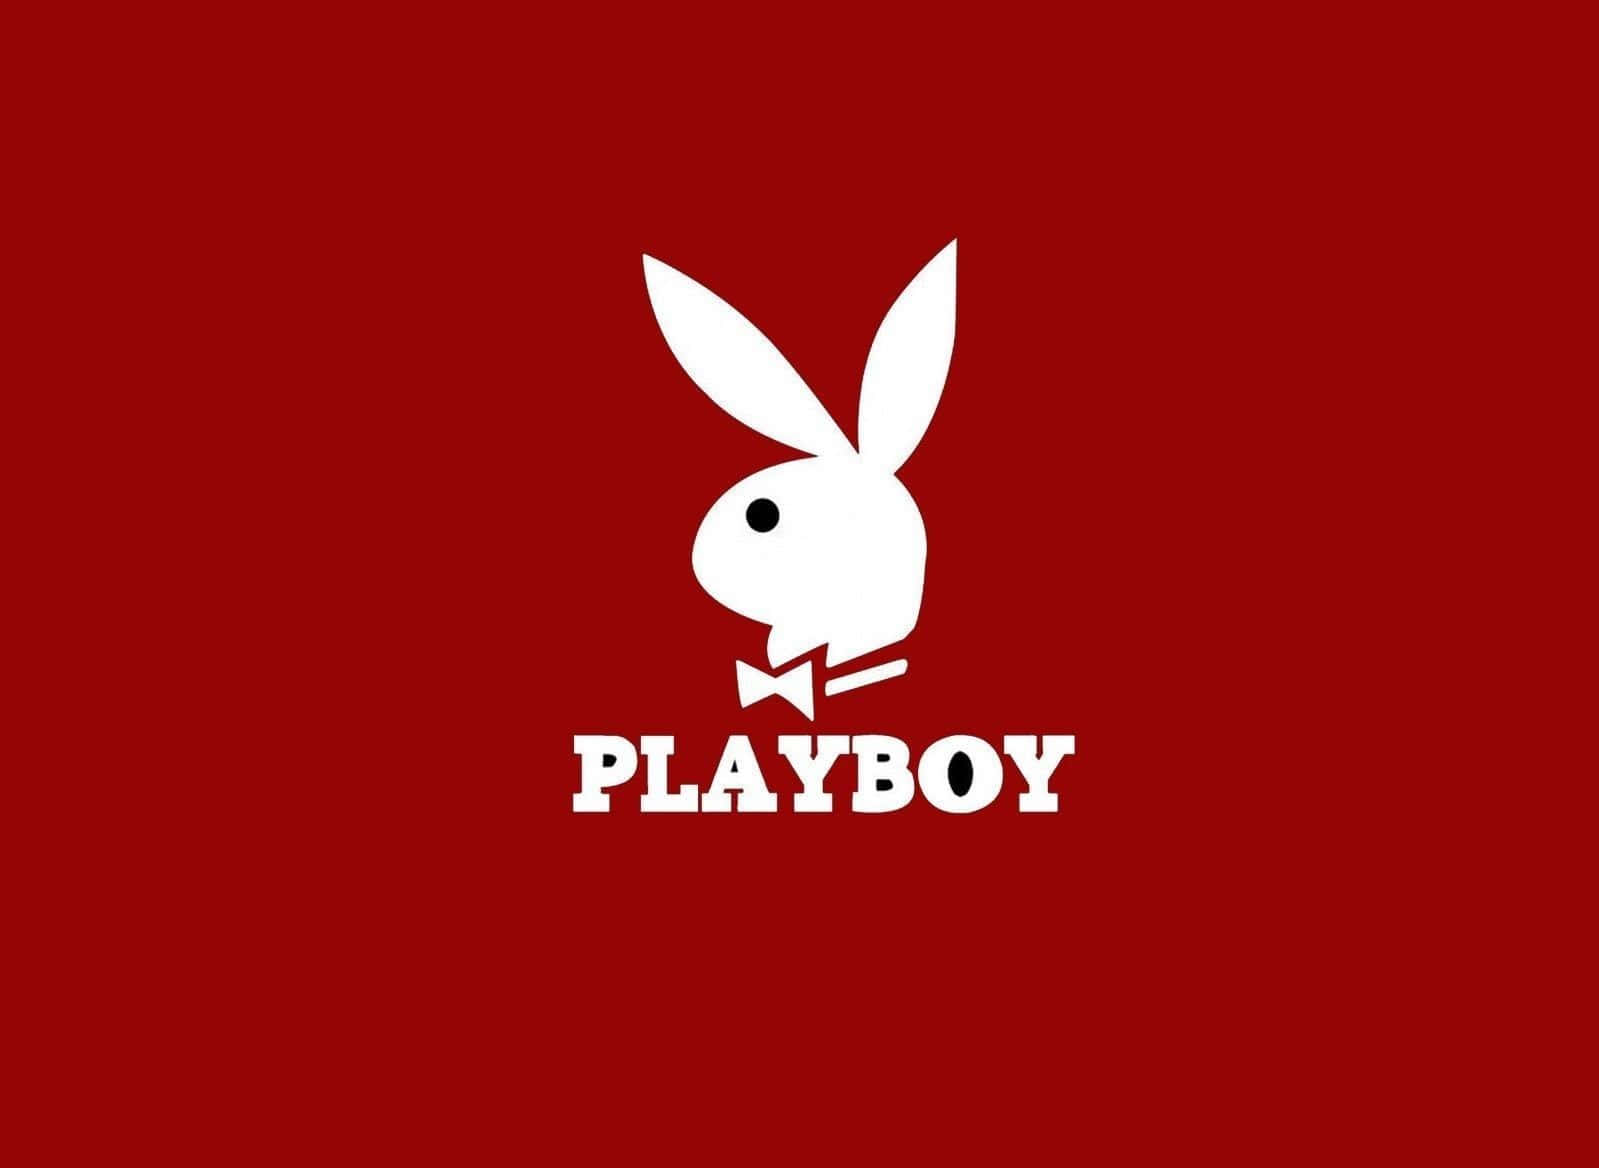 Playboy Aesthetic - Classic and Vintage